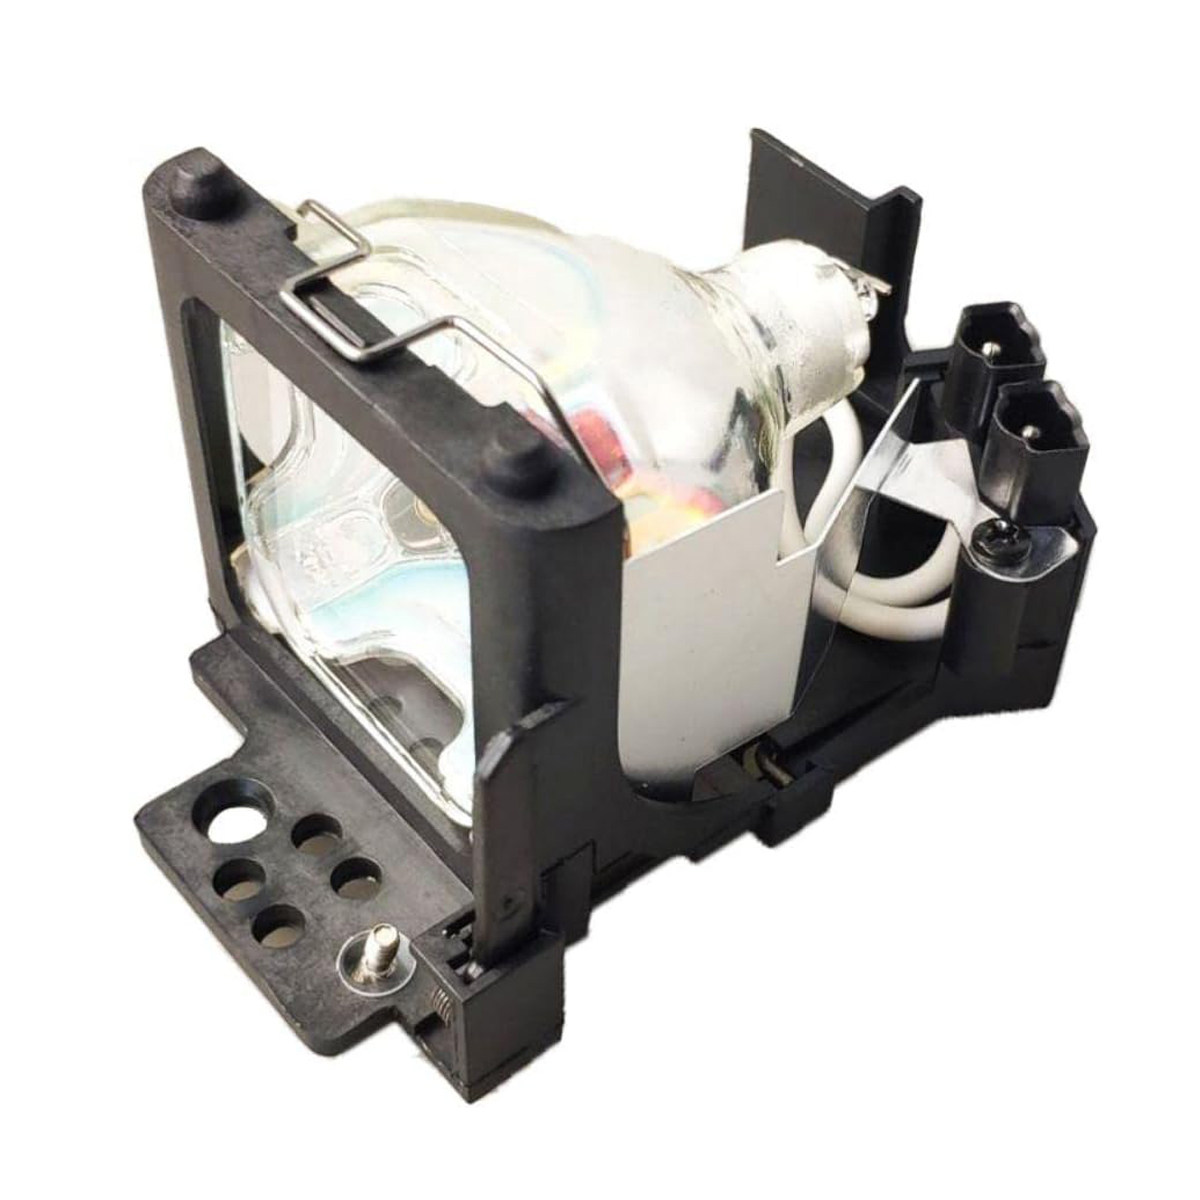 Replacement Projector lamp DT00381 For Hitachi CP-S220 CP-S220A CP-S220W CP-S270